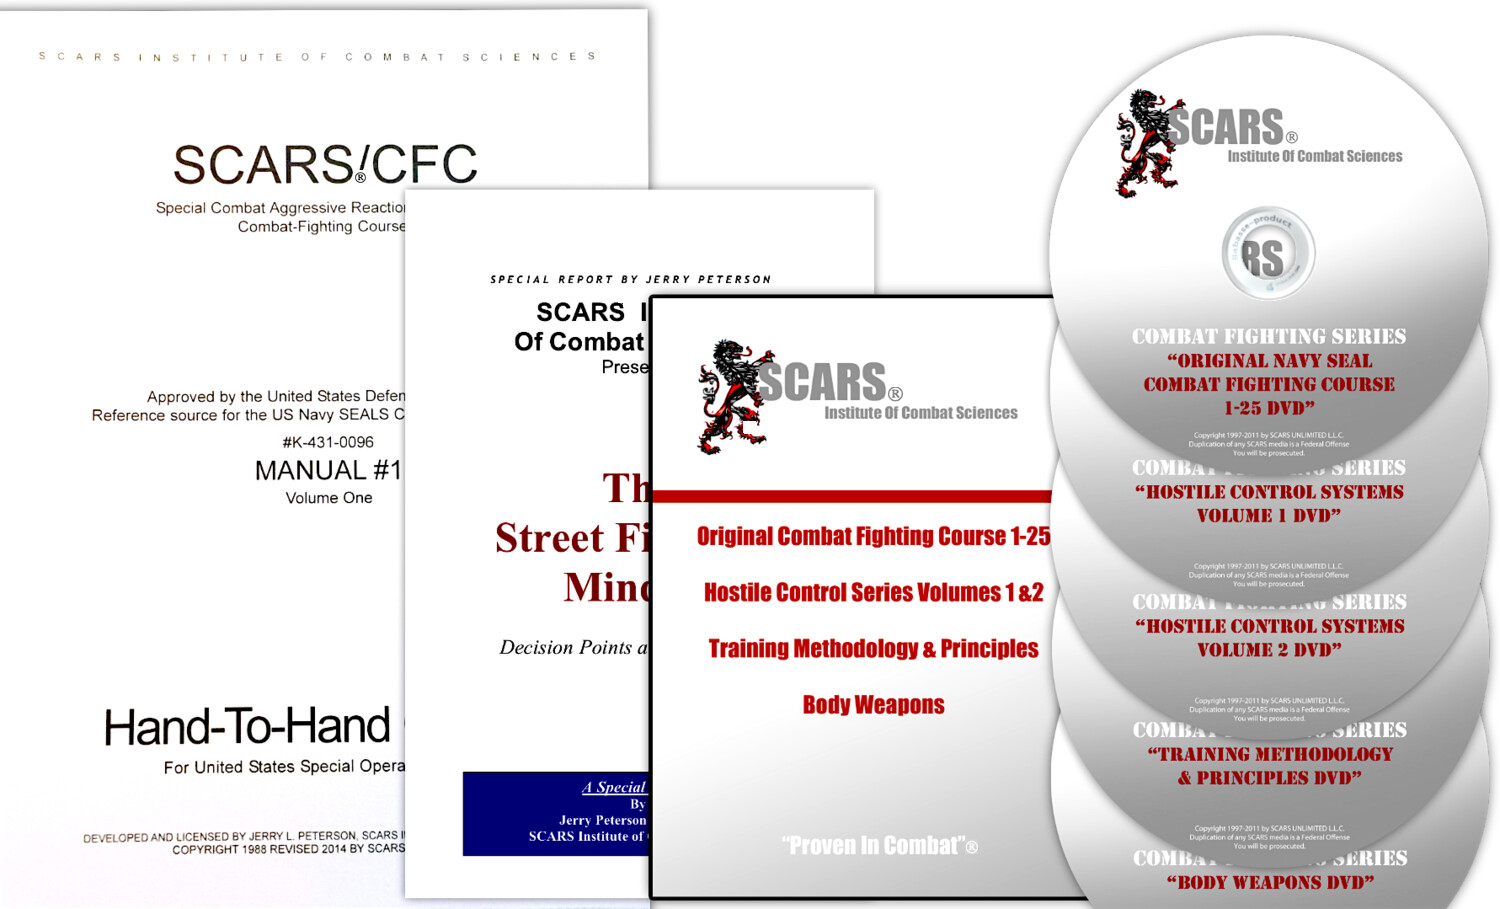 This is an image of the SCARS Combat fighting manual, street fighter's mindset and 5 dvd pack.